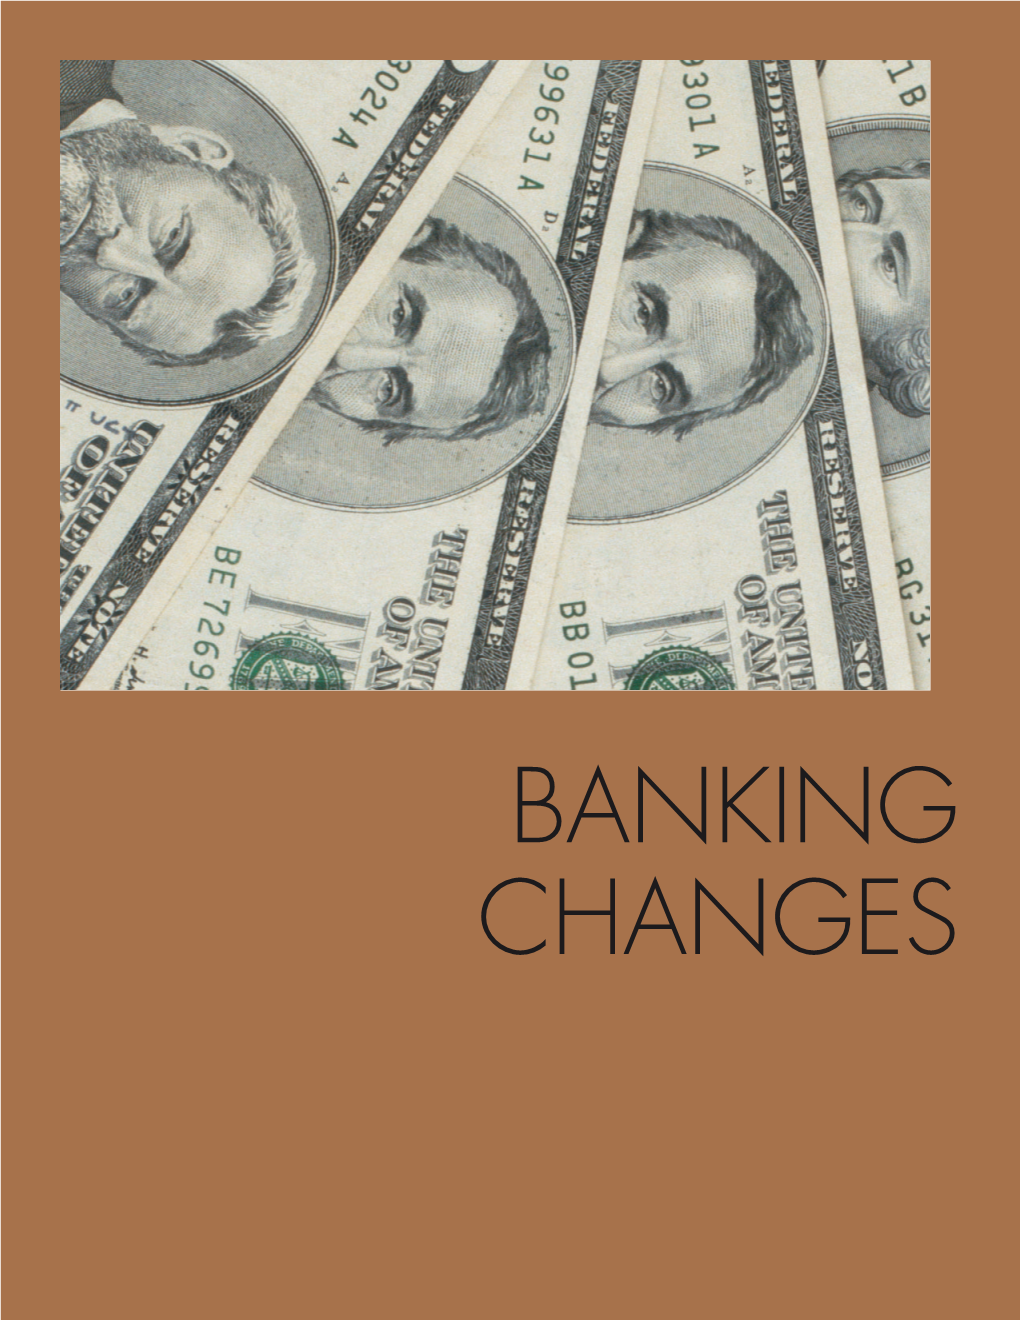 BANKING CHANGES When the Banks Left Town: the Impact of Banking Changes on Hampton Roads